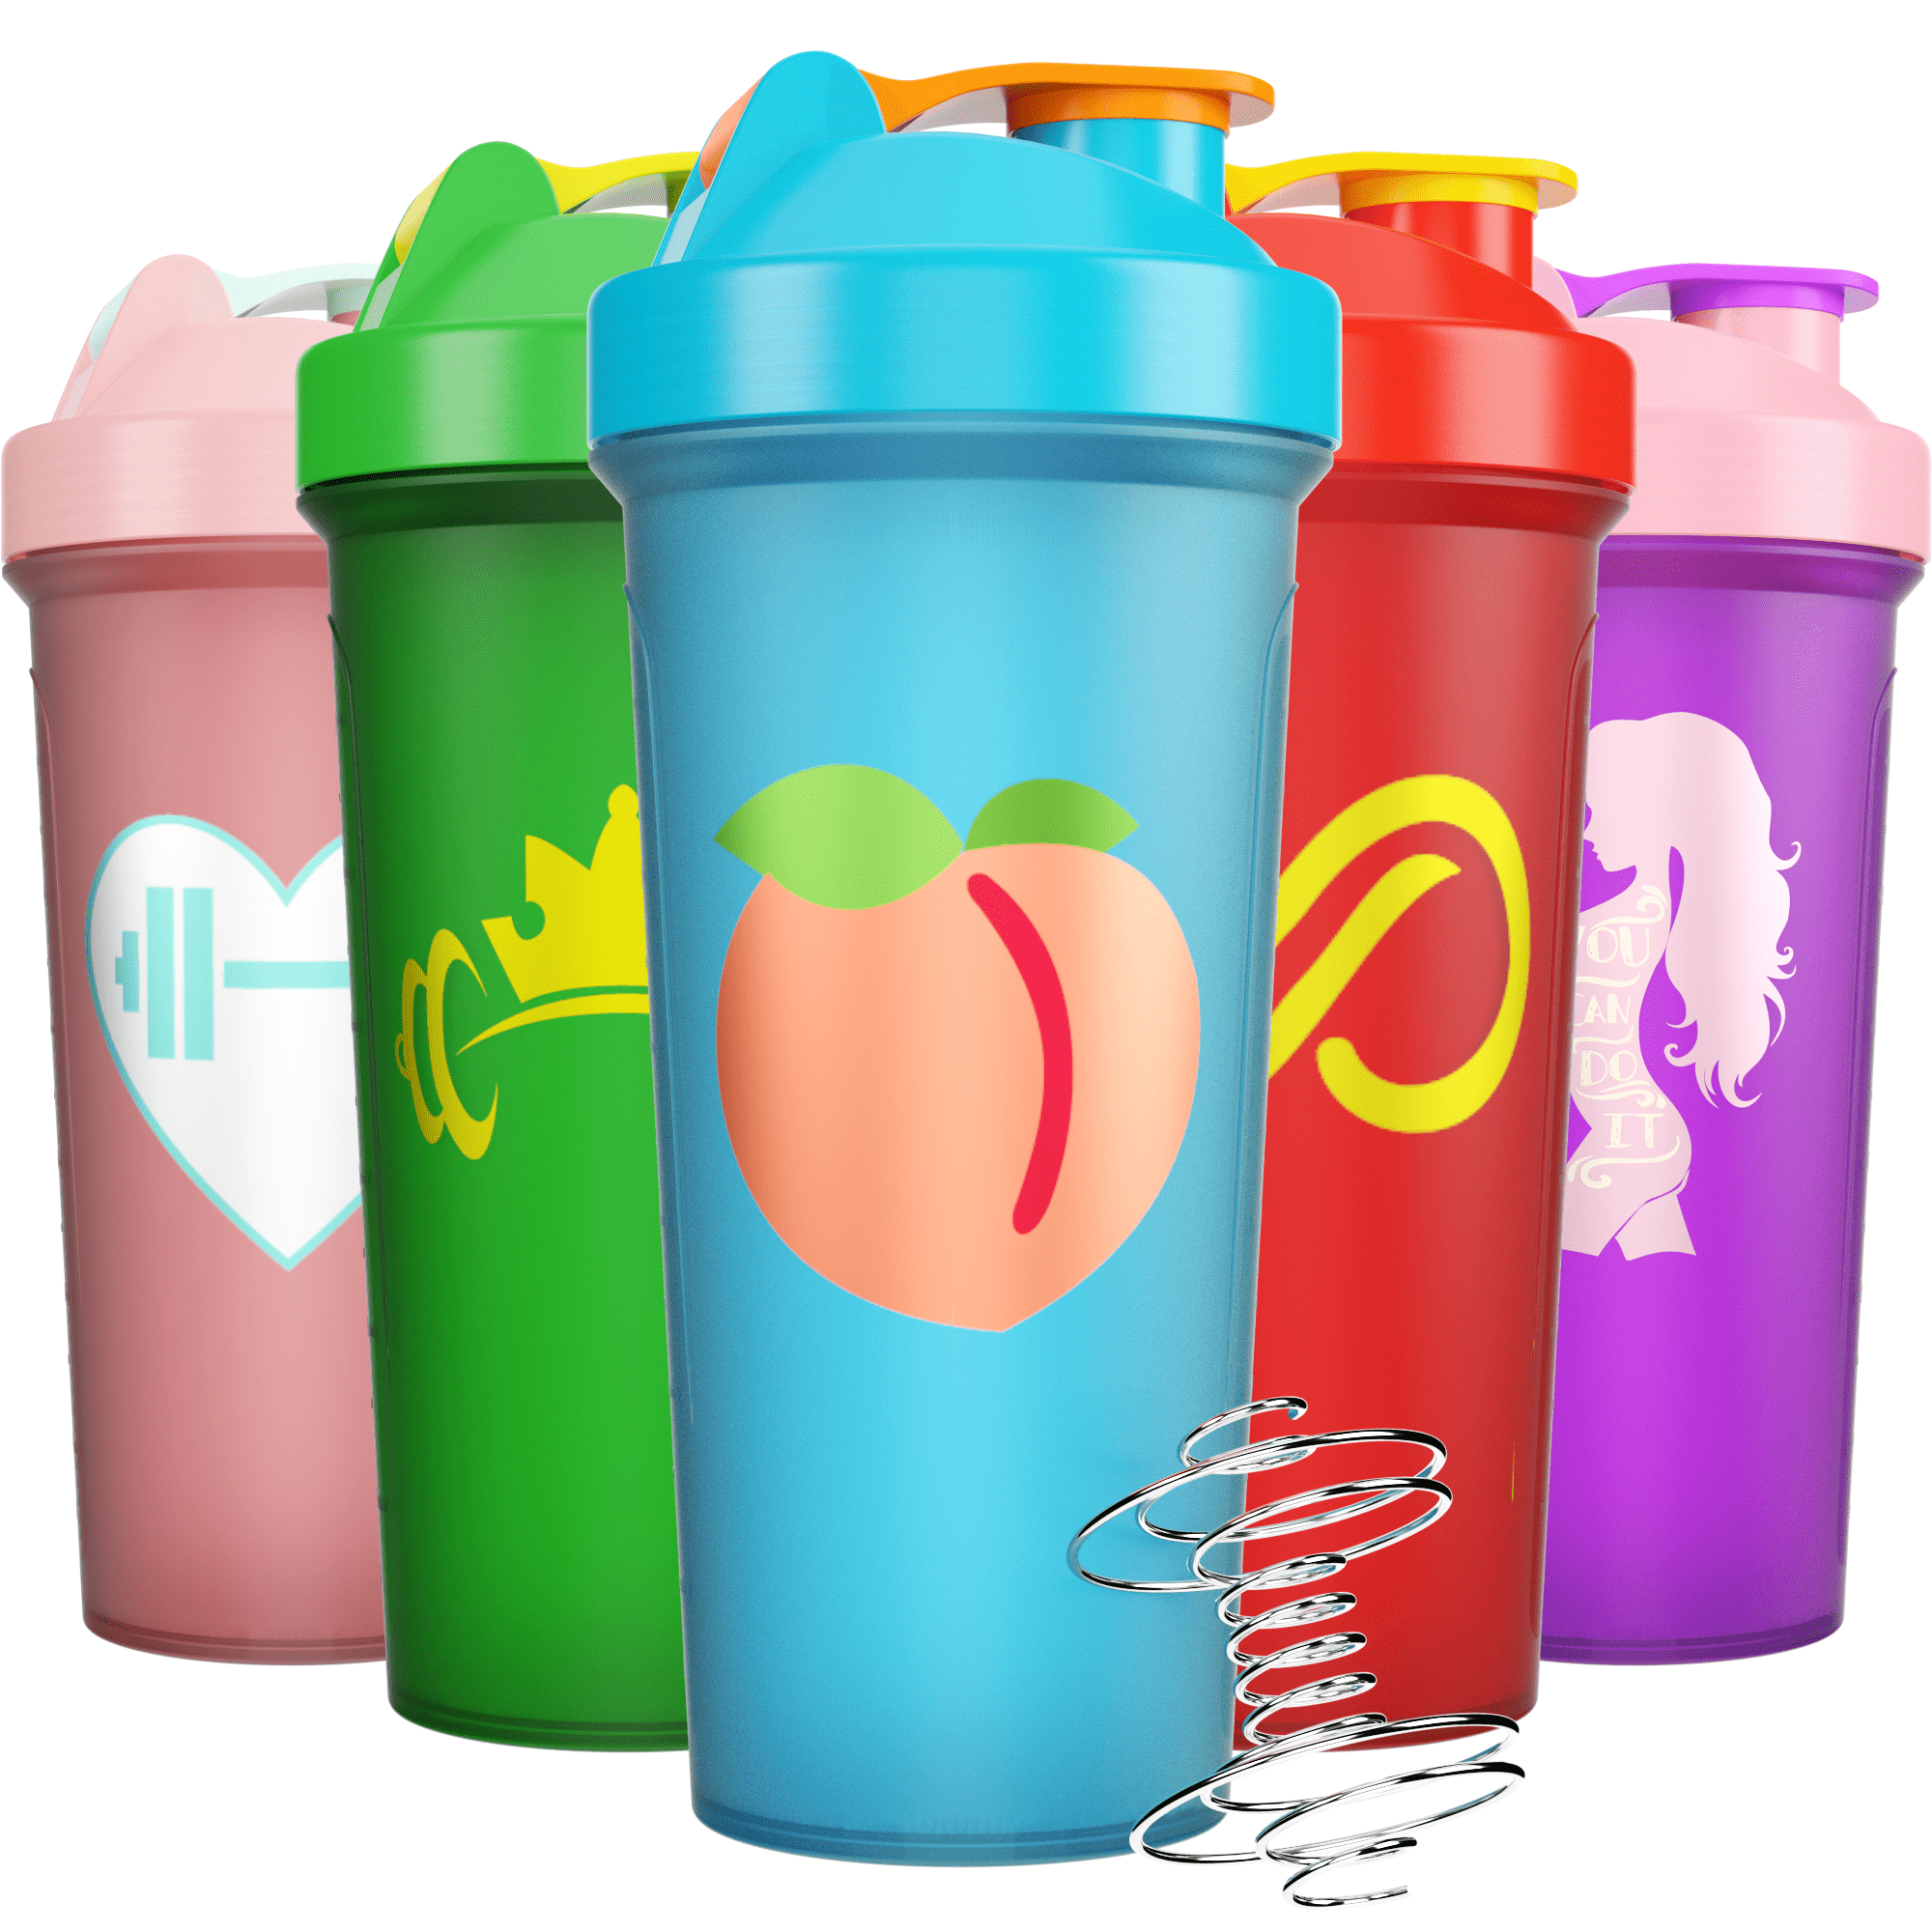  JEELA SPORTS 5 PACK Protein Shaker Bottles for Protein Mixes  -20 OZ- Dishwasher Safe Shaker Cups for Protein Shakes - Shaker Cup for Blender  Protein Shaker Bottle for Shakes Protein Shake